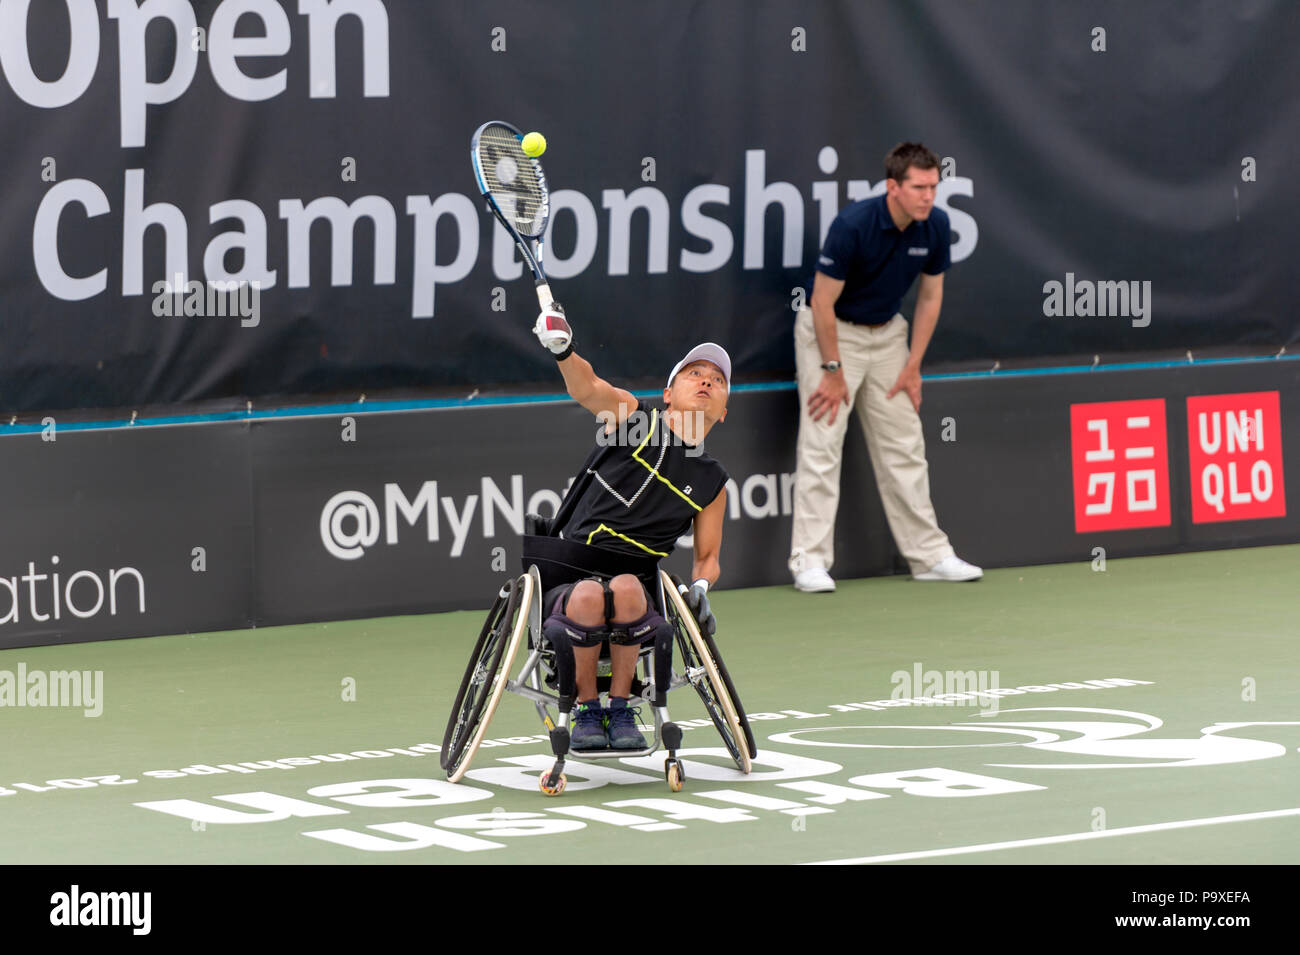 Shota Kawano in action in the men's British Open Wheelchair Tennis  Championships at the Nottingham Tennis centre July 2018 sponsored by UNIQLO  Stock Photo - Alamy